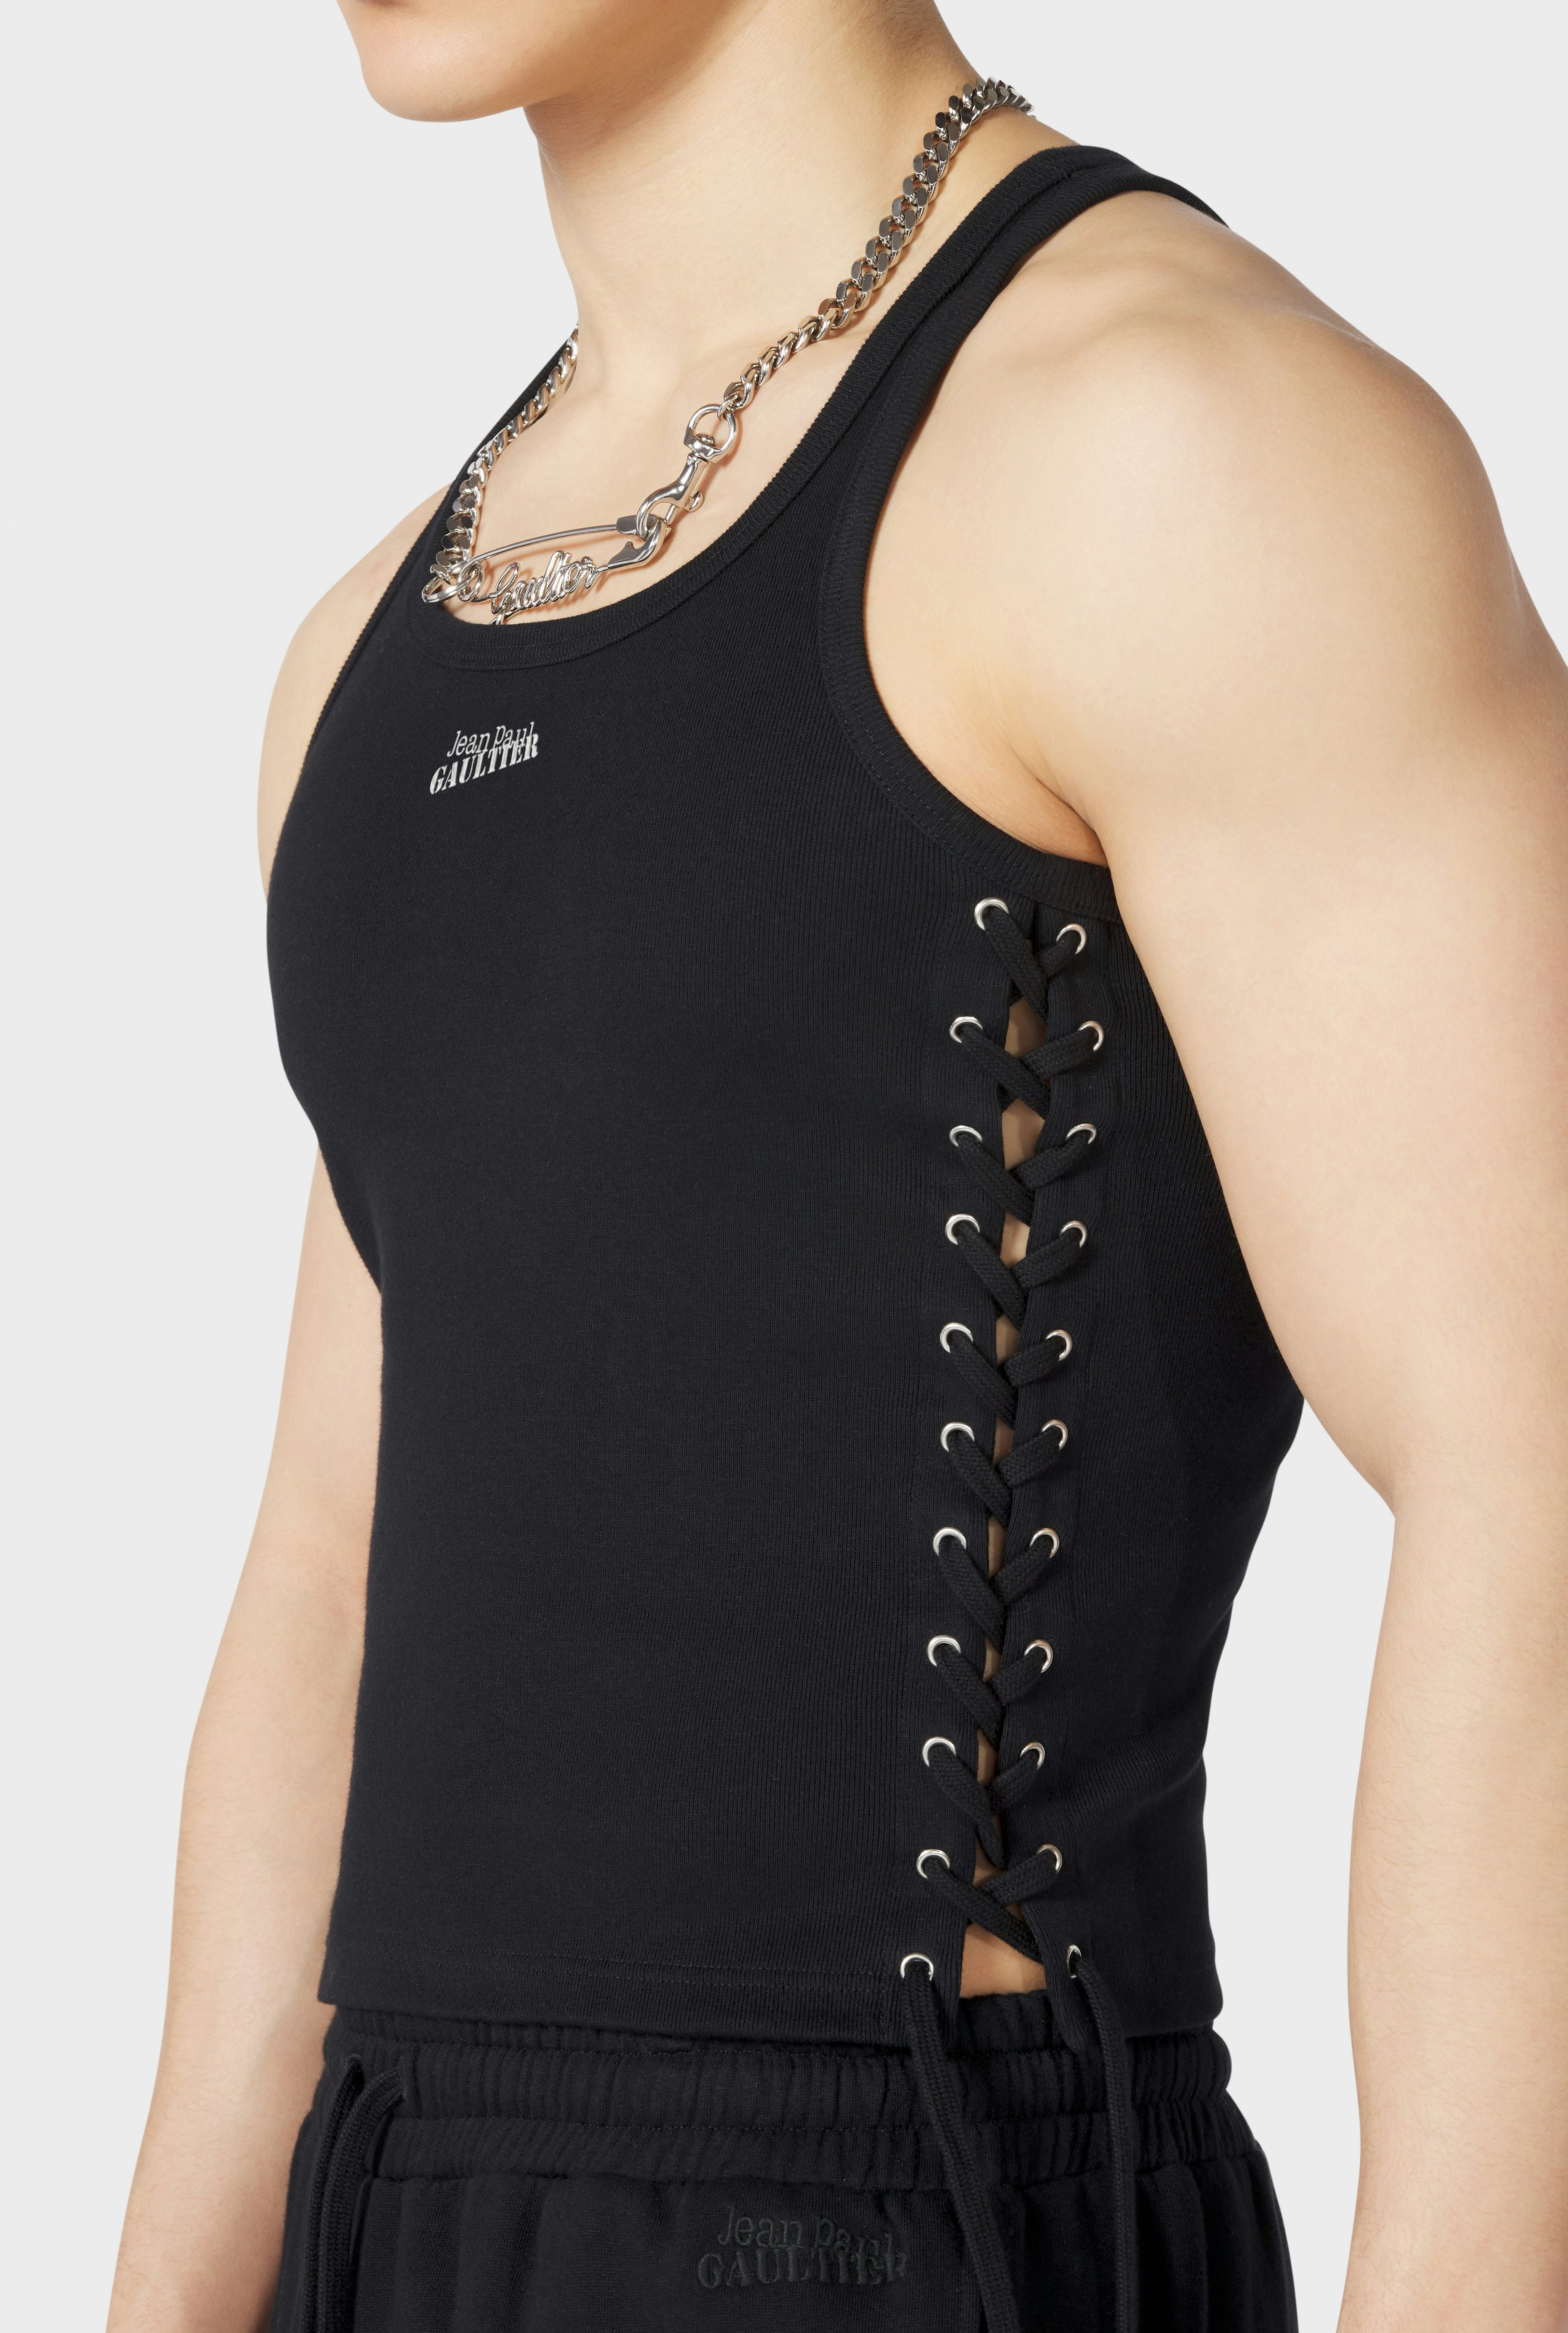 The Black Lace-Up JPG Tank Top